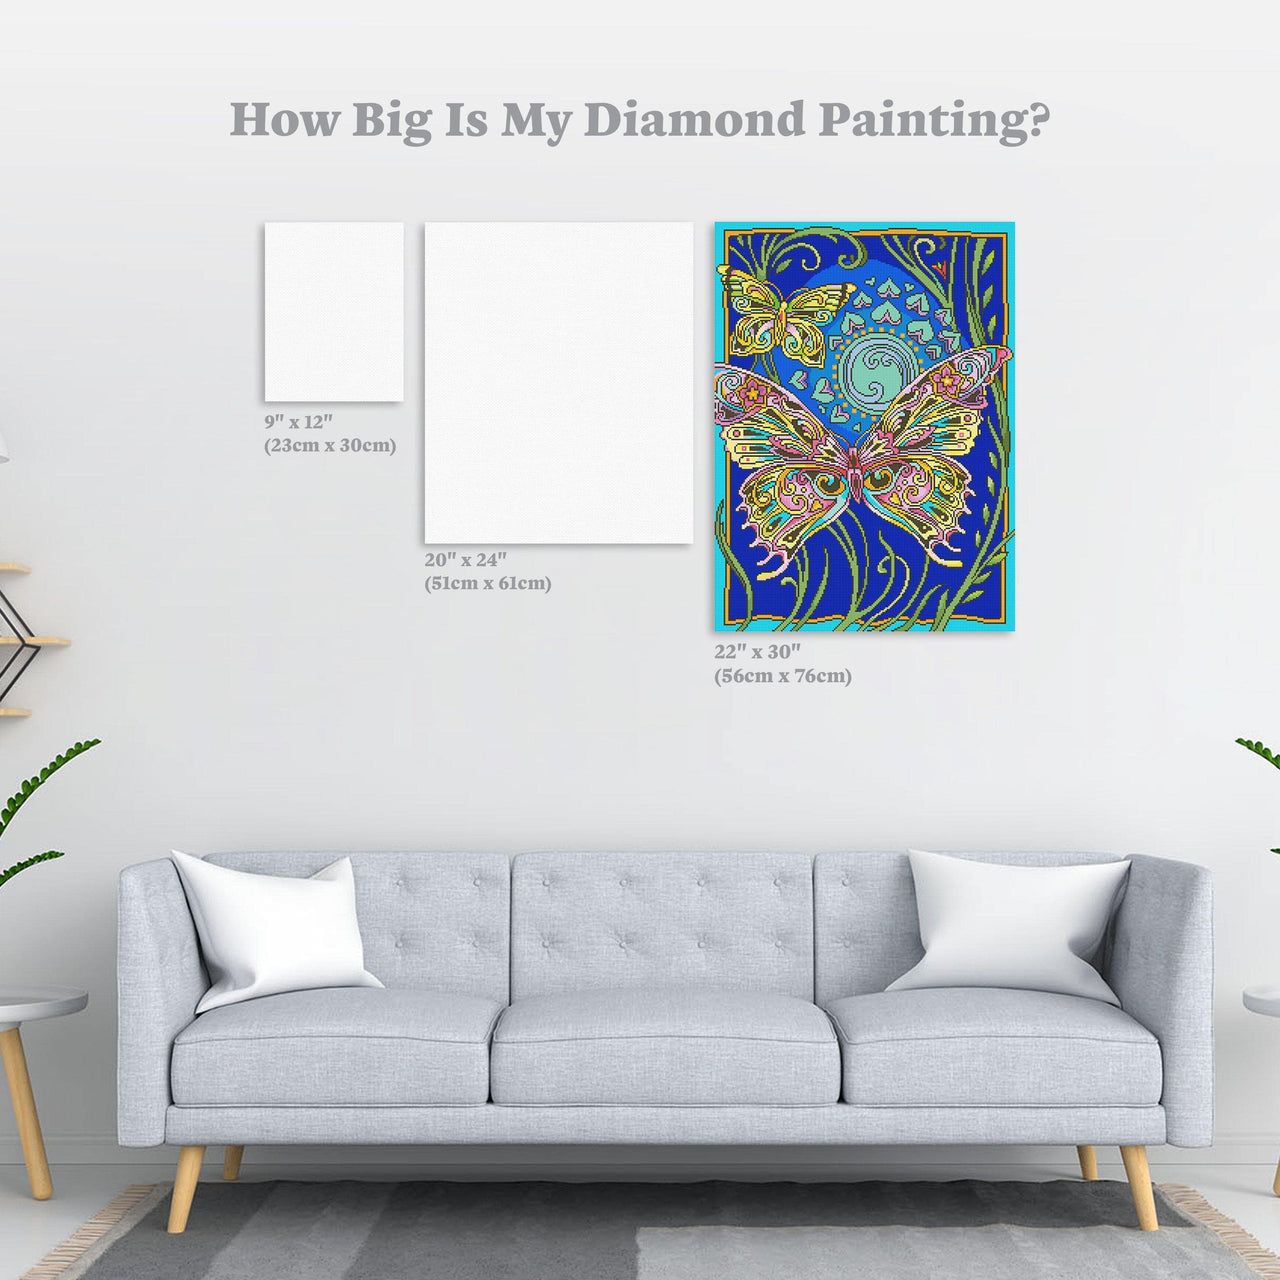 Diamond Painting Butterflies 22" x 30″ (56cm x 76cm) / Round with 34 Colors including 2 ABs / 54,126